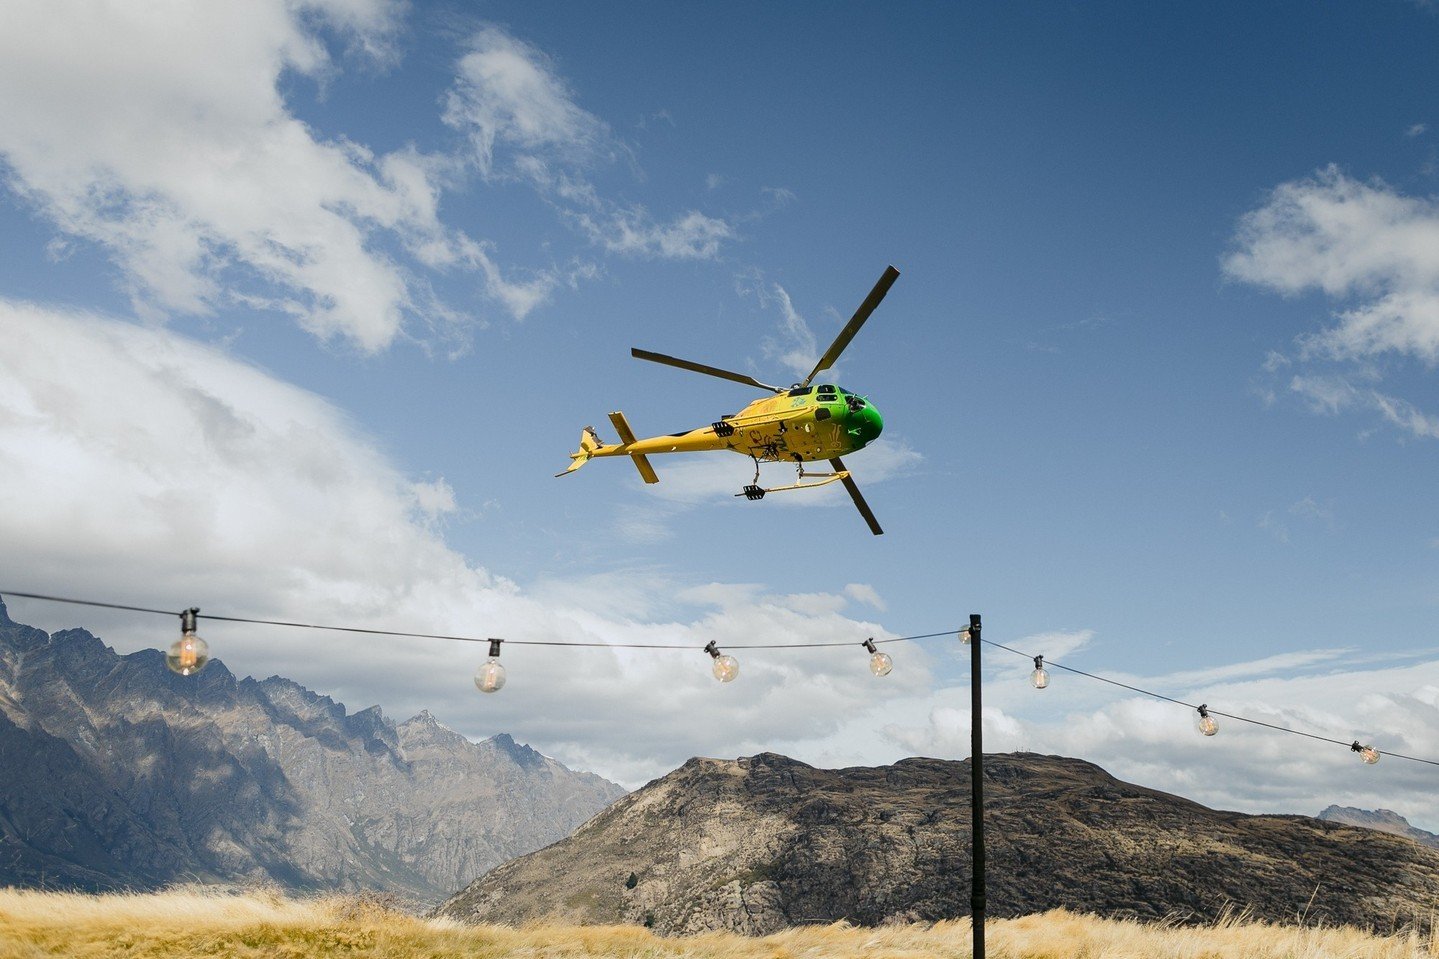 Fancy an extra special arrival for your wedding day or corporate event? There are options 🚁, but make sure to let us know what you're thinking as there can be some limitations we'll need to chat about.⁠
⁠
Get in touch 👉🏼 info@nzhighcountry.co.nz (